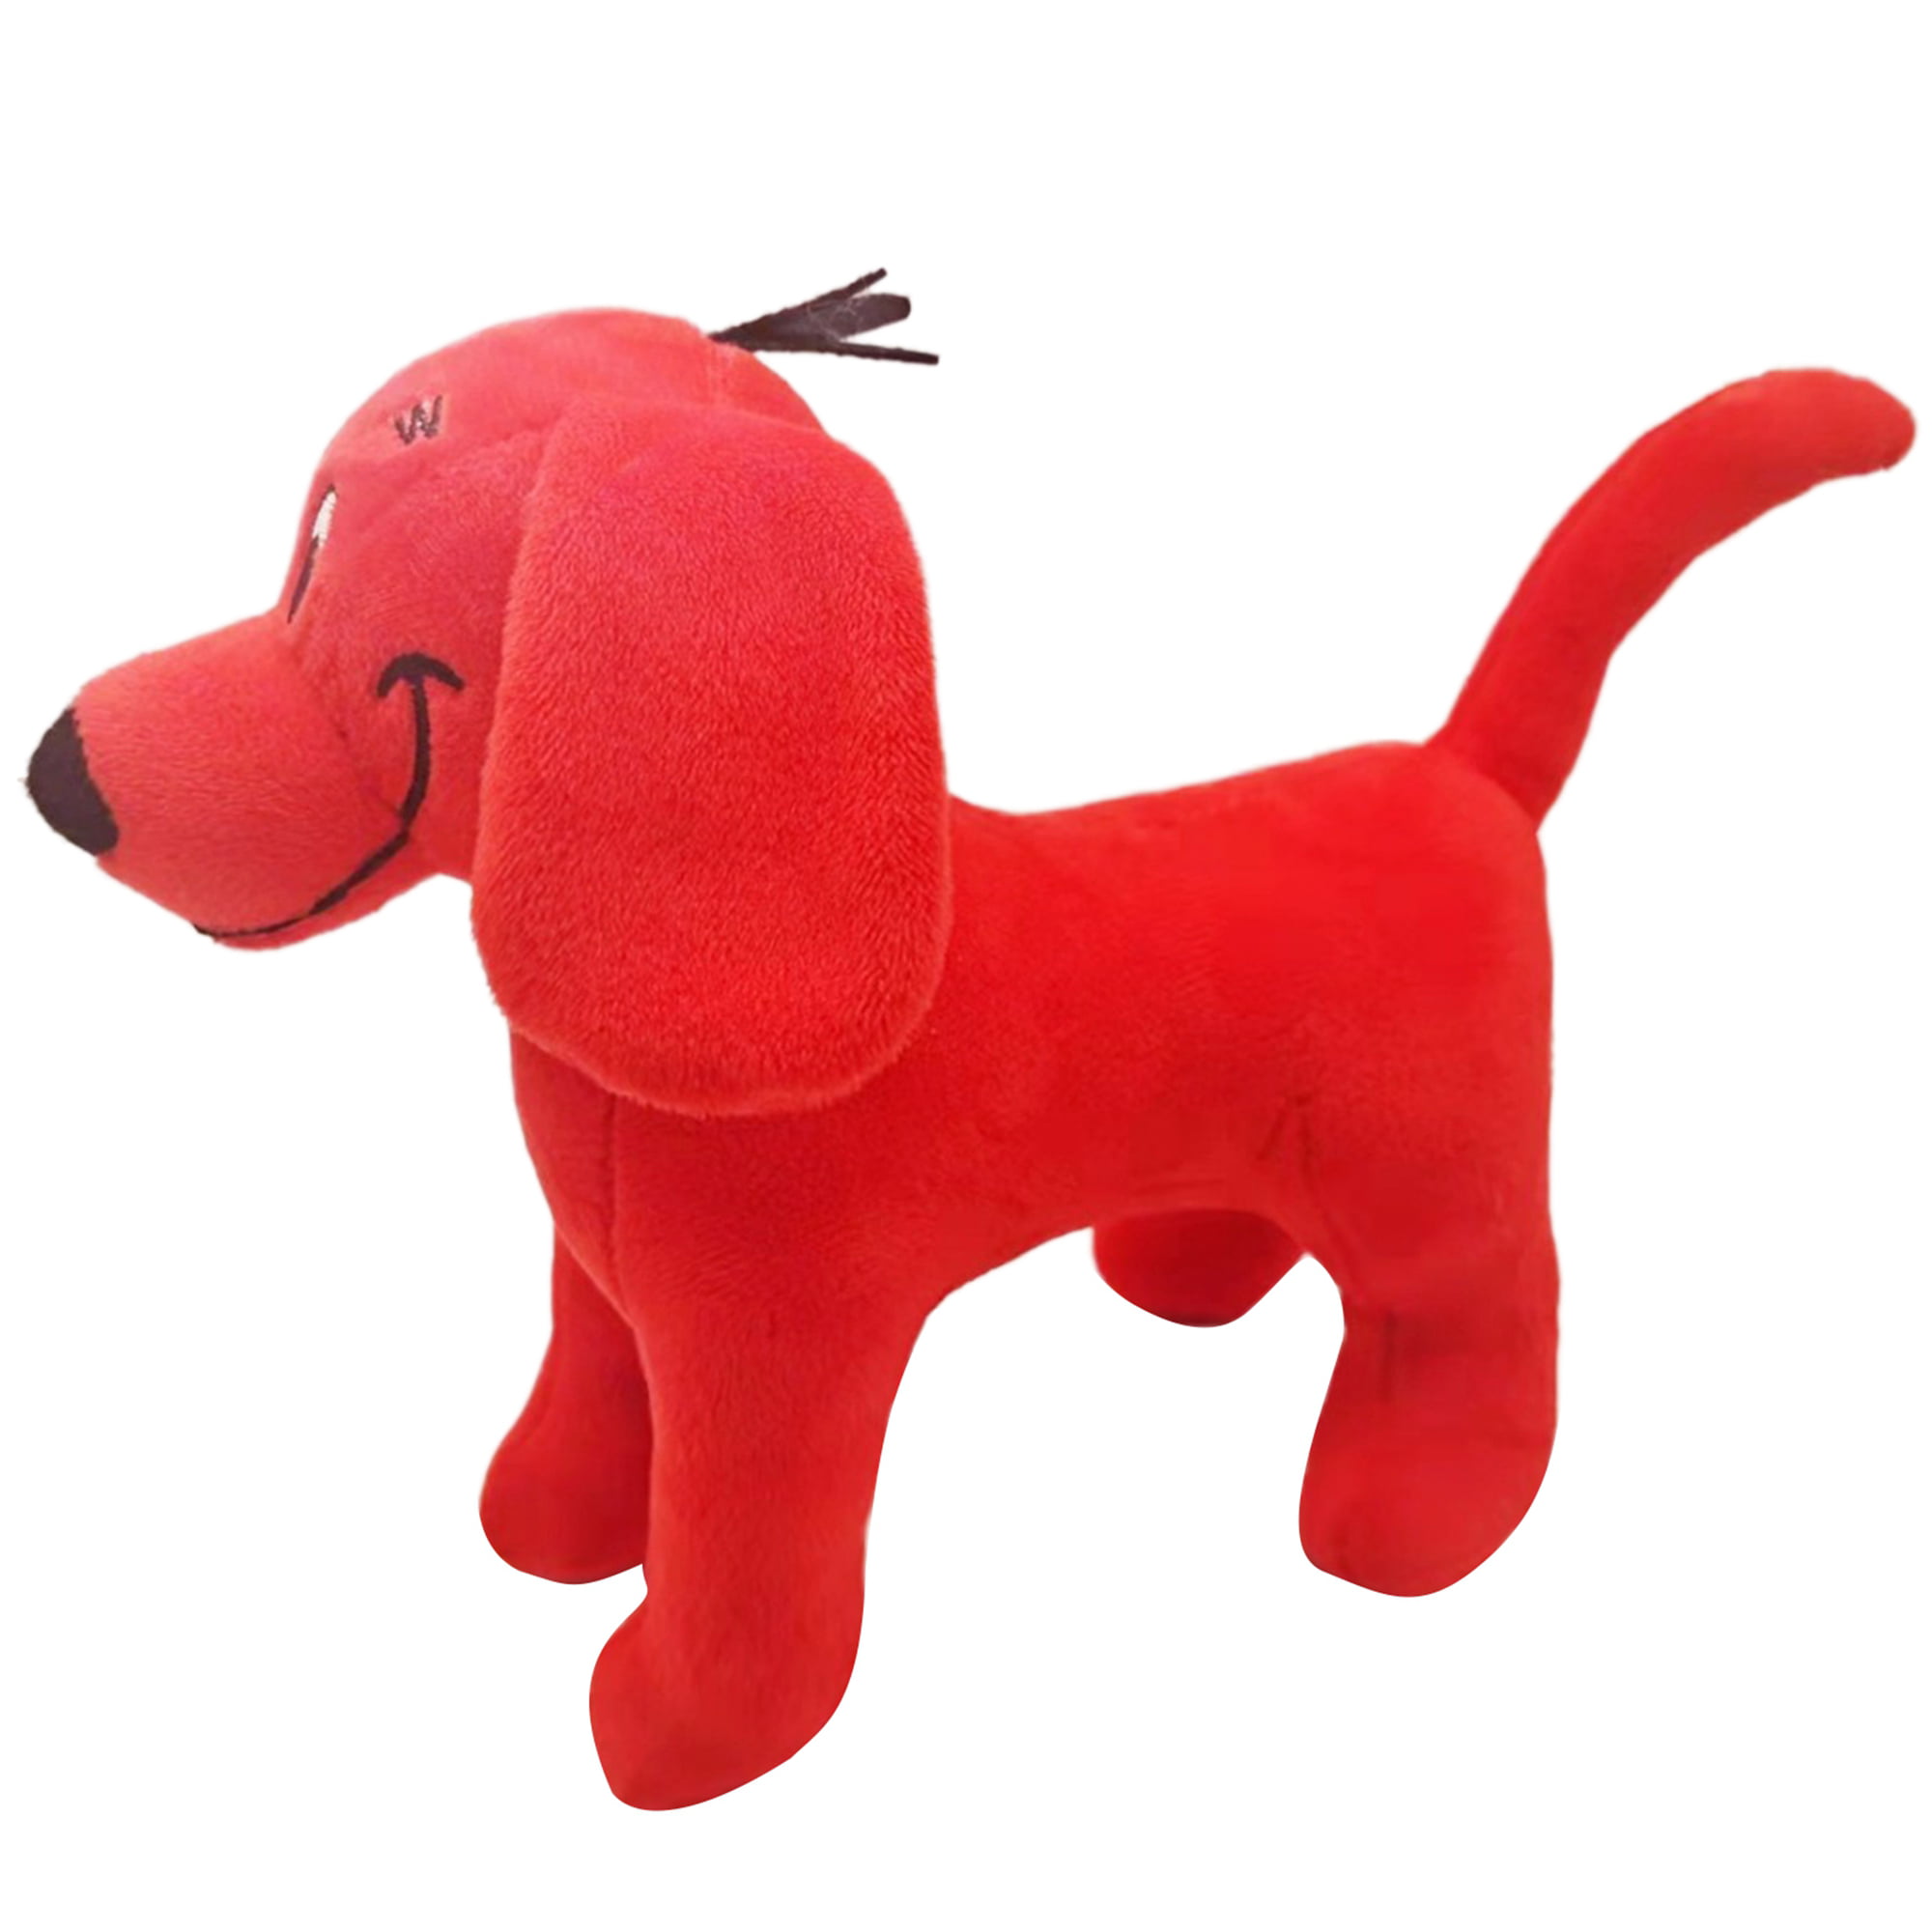 Doberman Pinscher Dog Plush Soft Toy Doll For Kids And Home Decor 